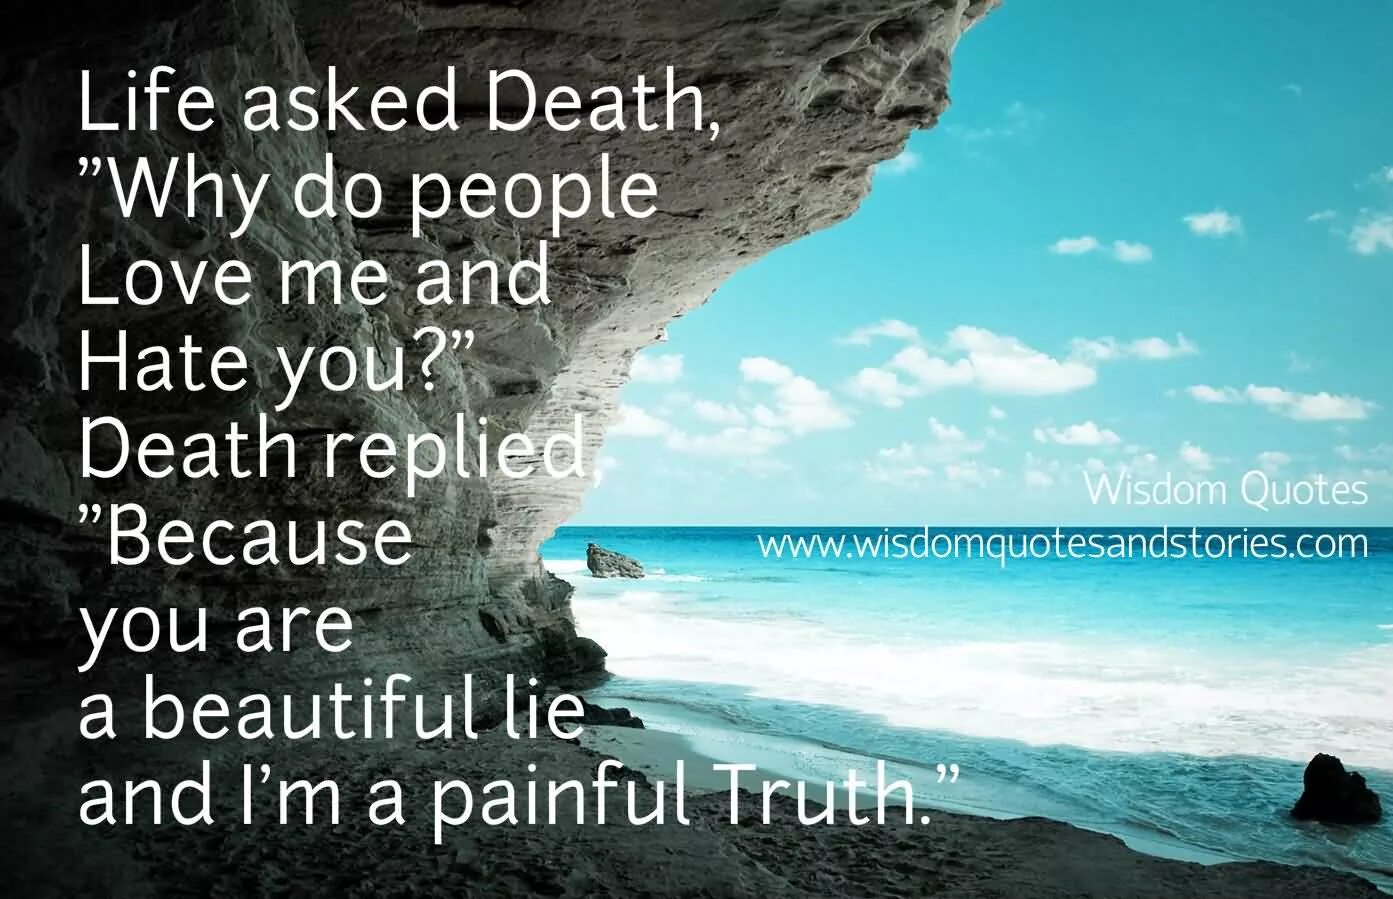 What do you think about life. Quotations about Life. Quotes about Life. Beautiful quotes about Life. Quotes about Death and Life.